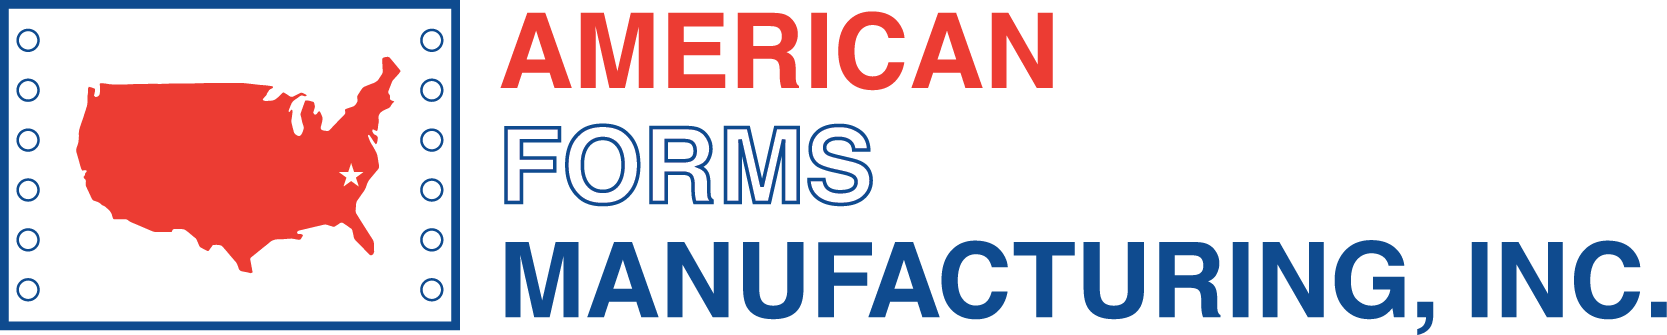 American Forms Mfg